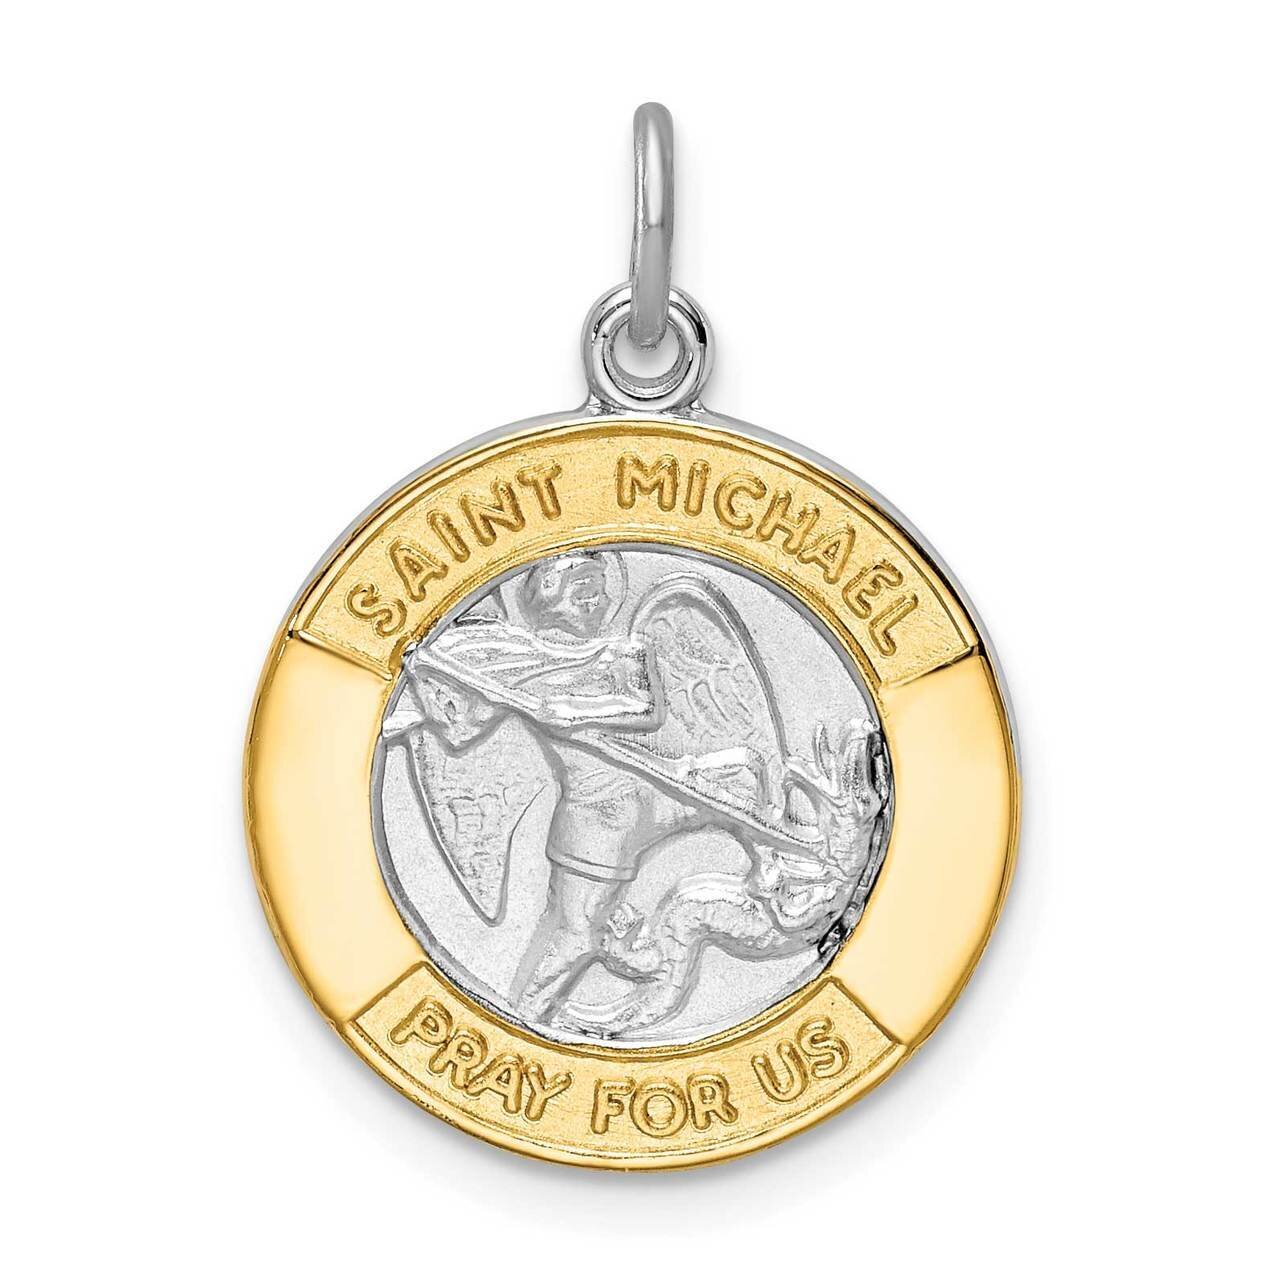 Gold Tone St. Michael Medal Sterling Silver Rhodium-plated QC9422